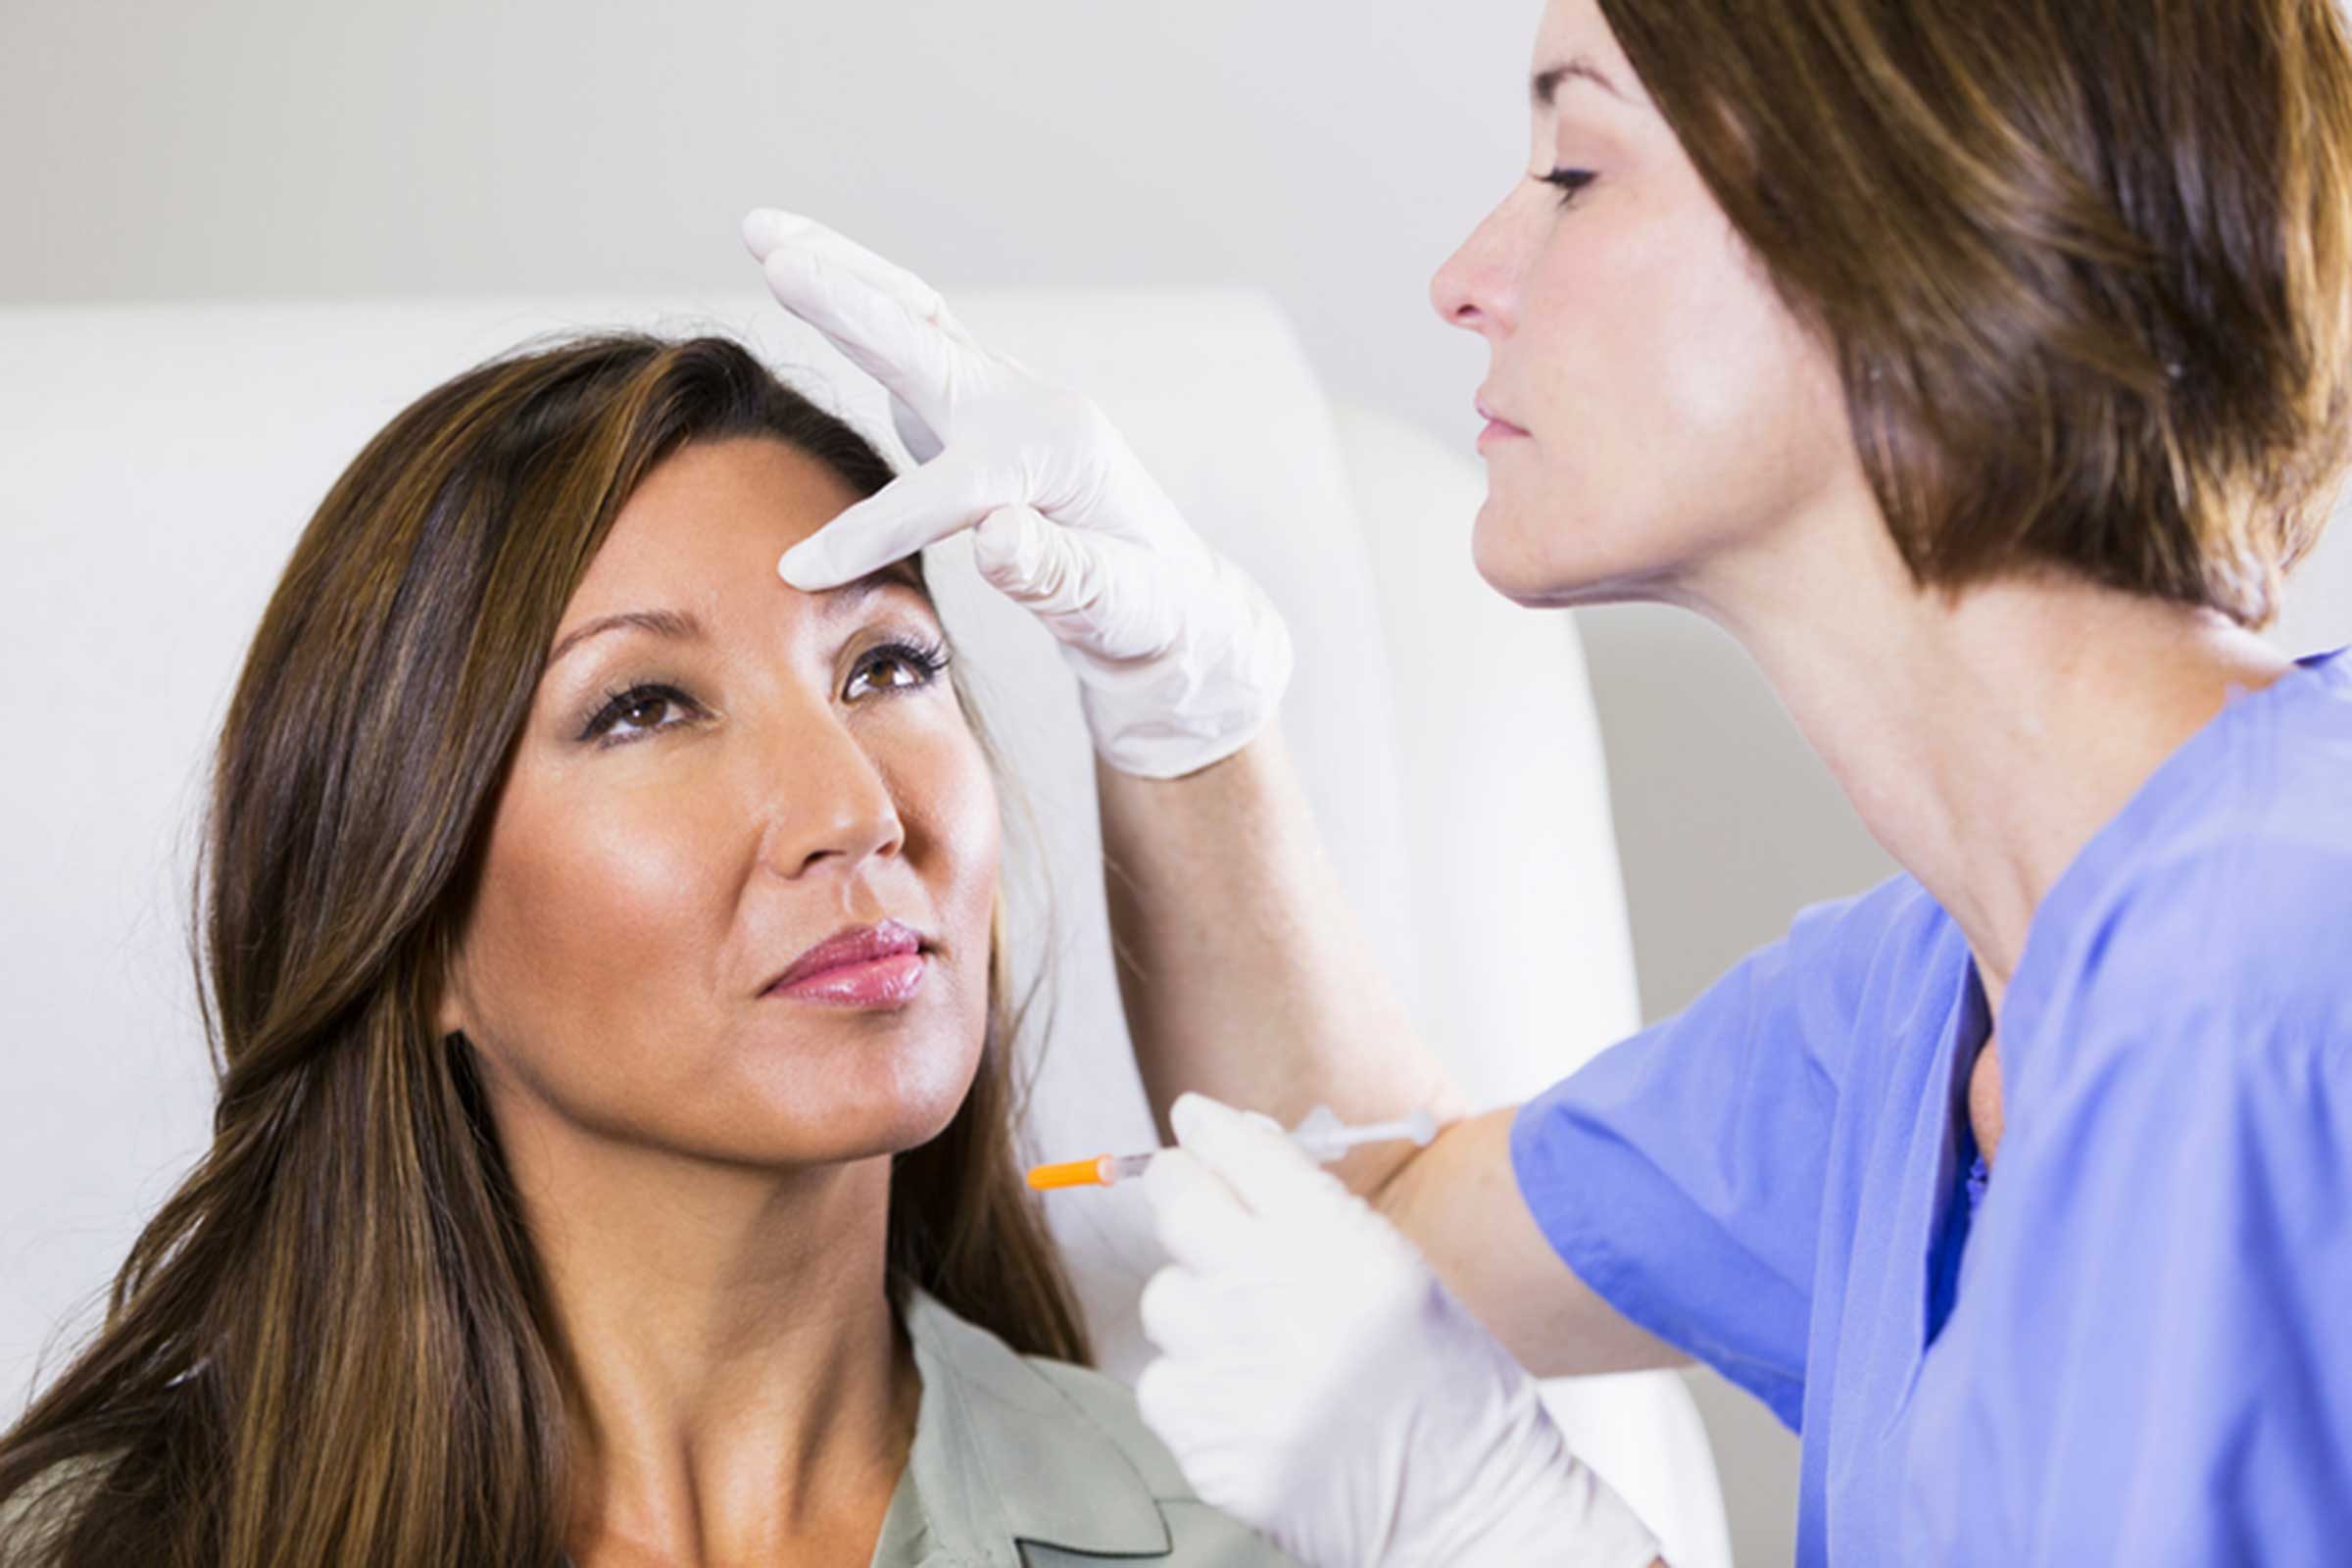 dermatologist with needle, touching woman's face